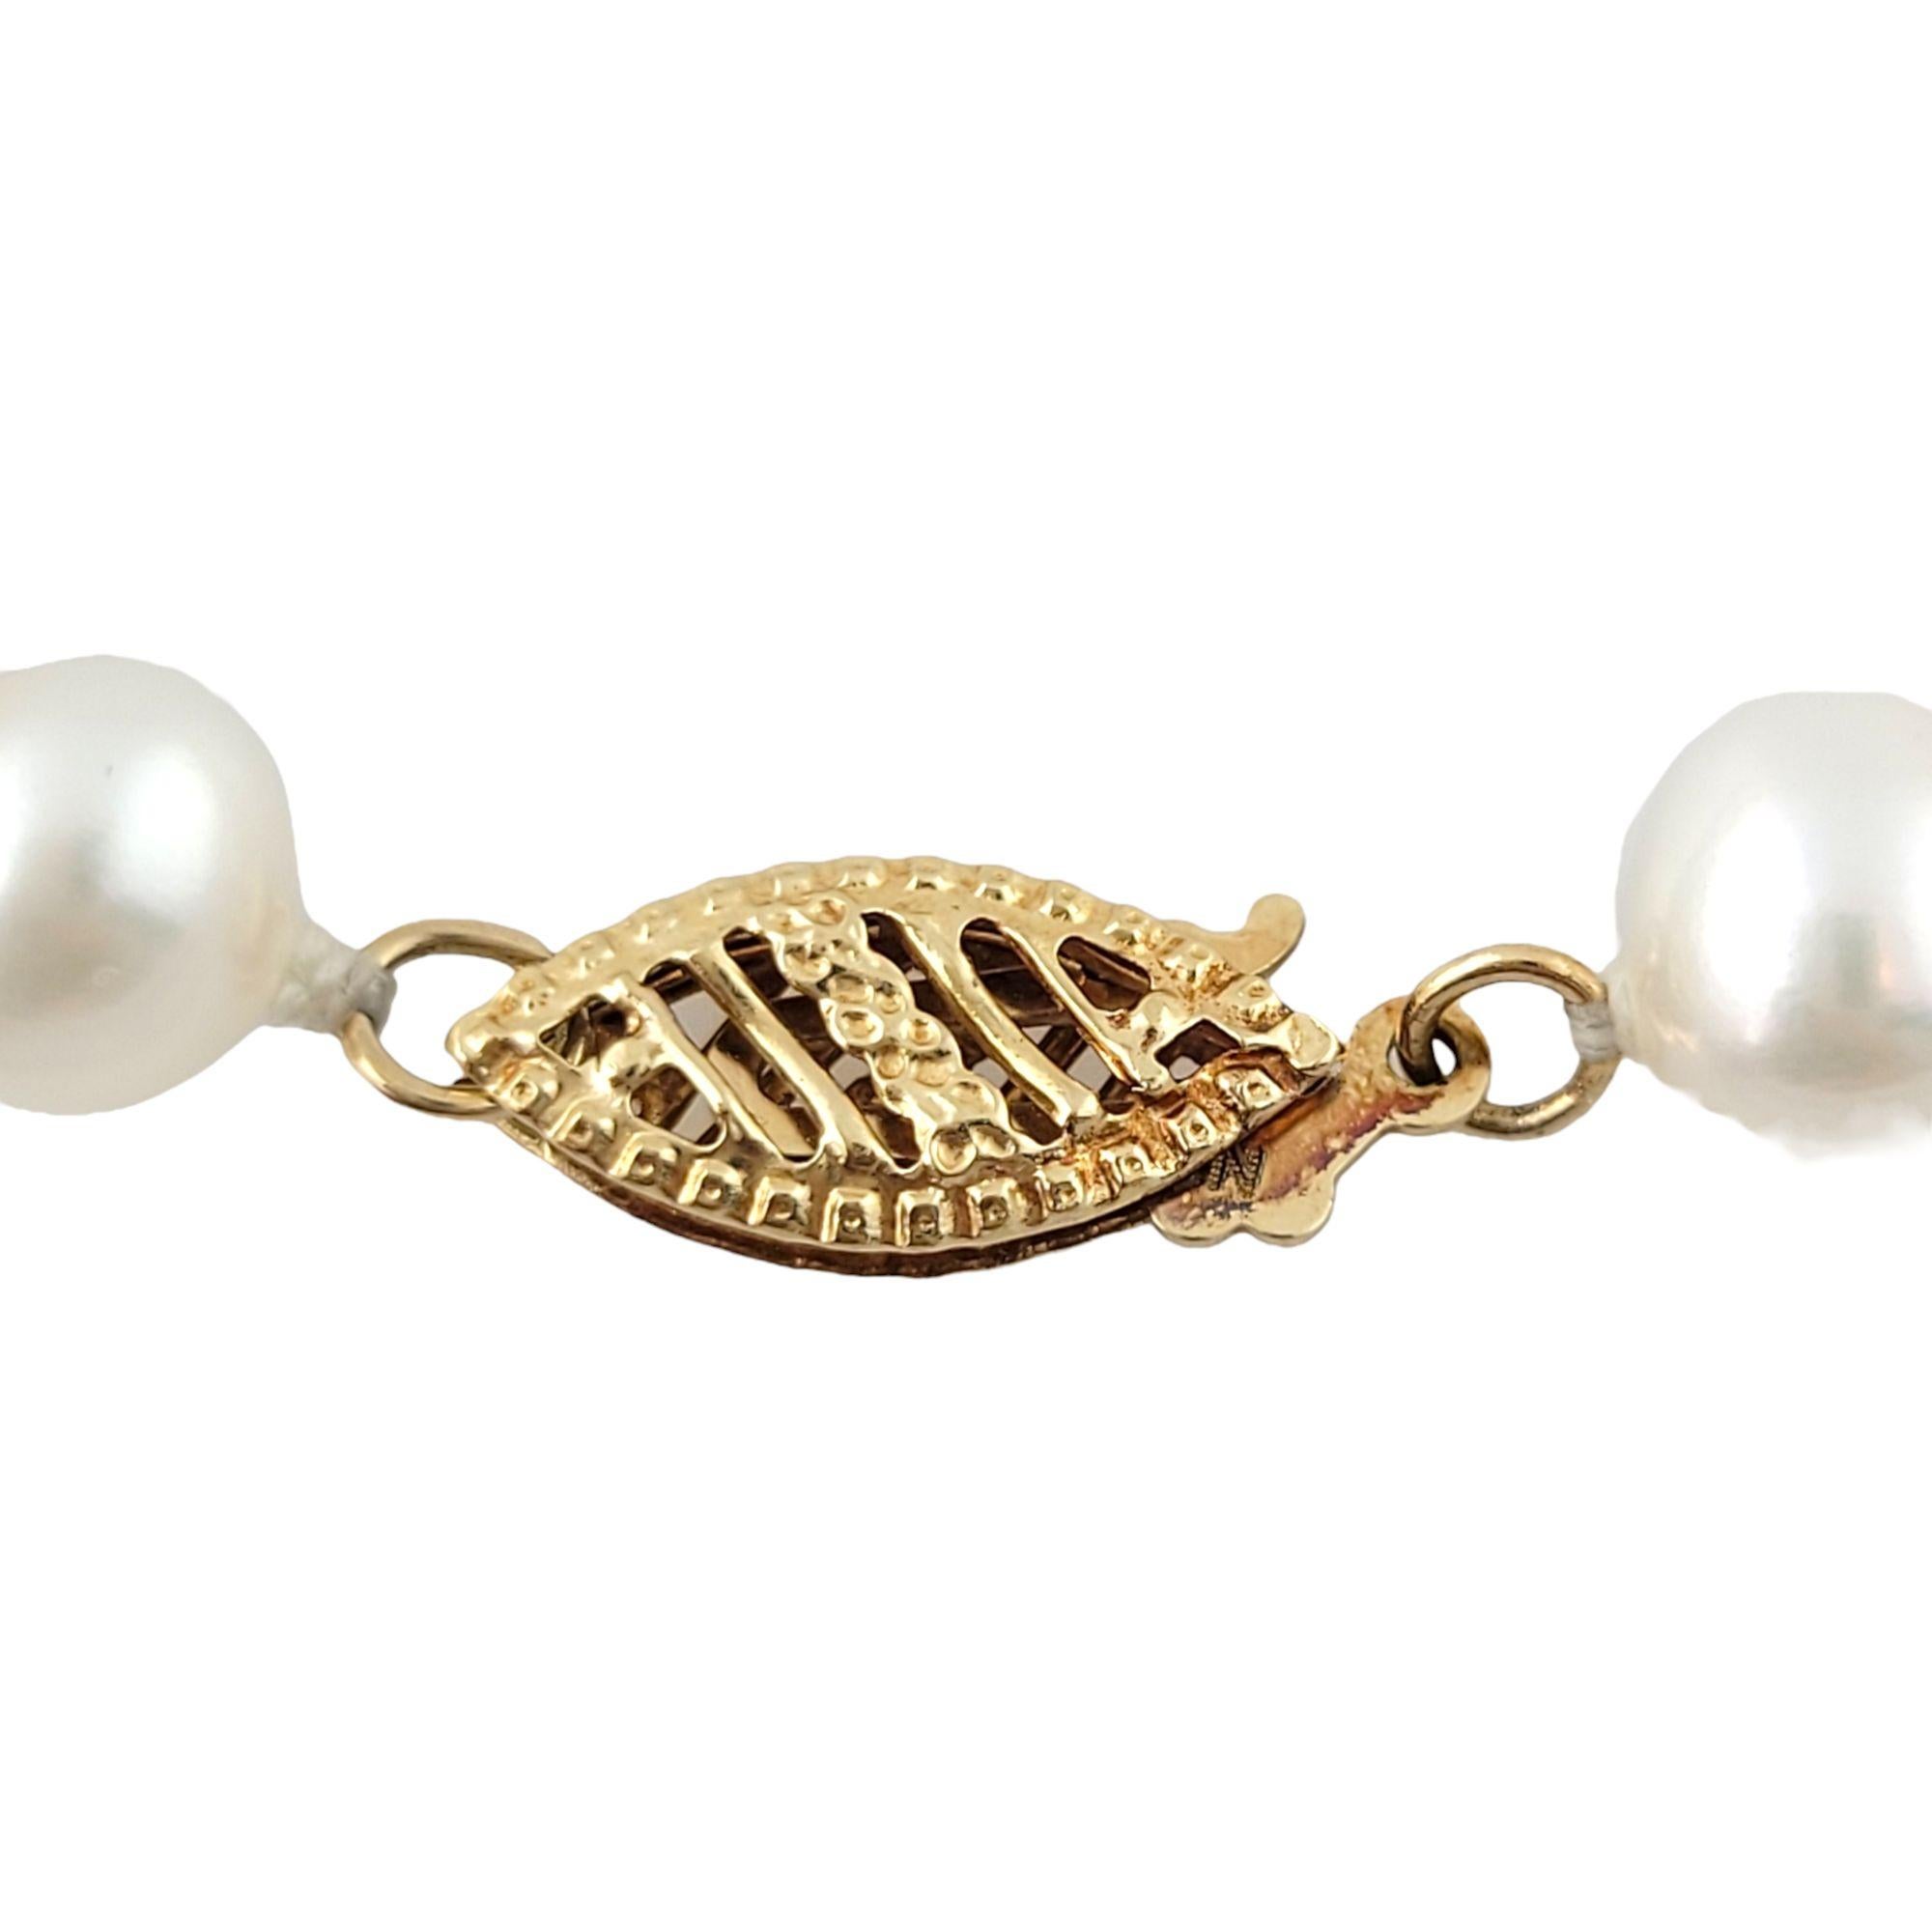 30 gorgeous freshwater pearls connected by a 14K yellow gold clasp to make a beautiful and elegant bracelet!

Length: 6 3/4